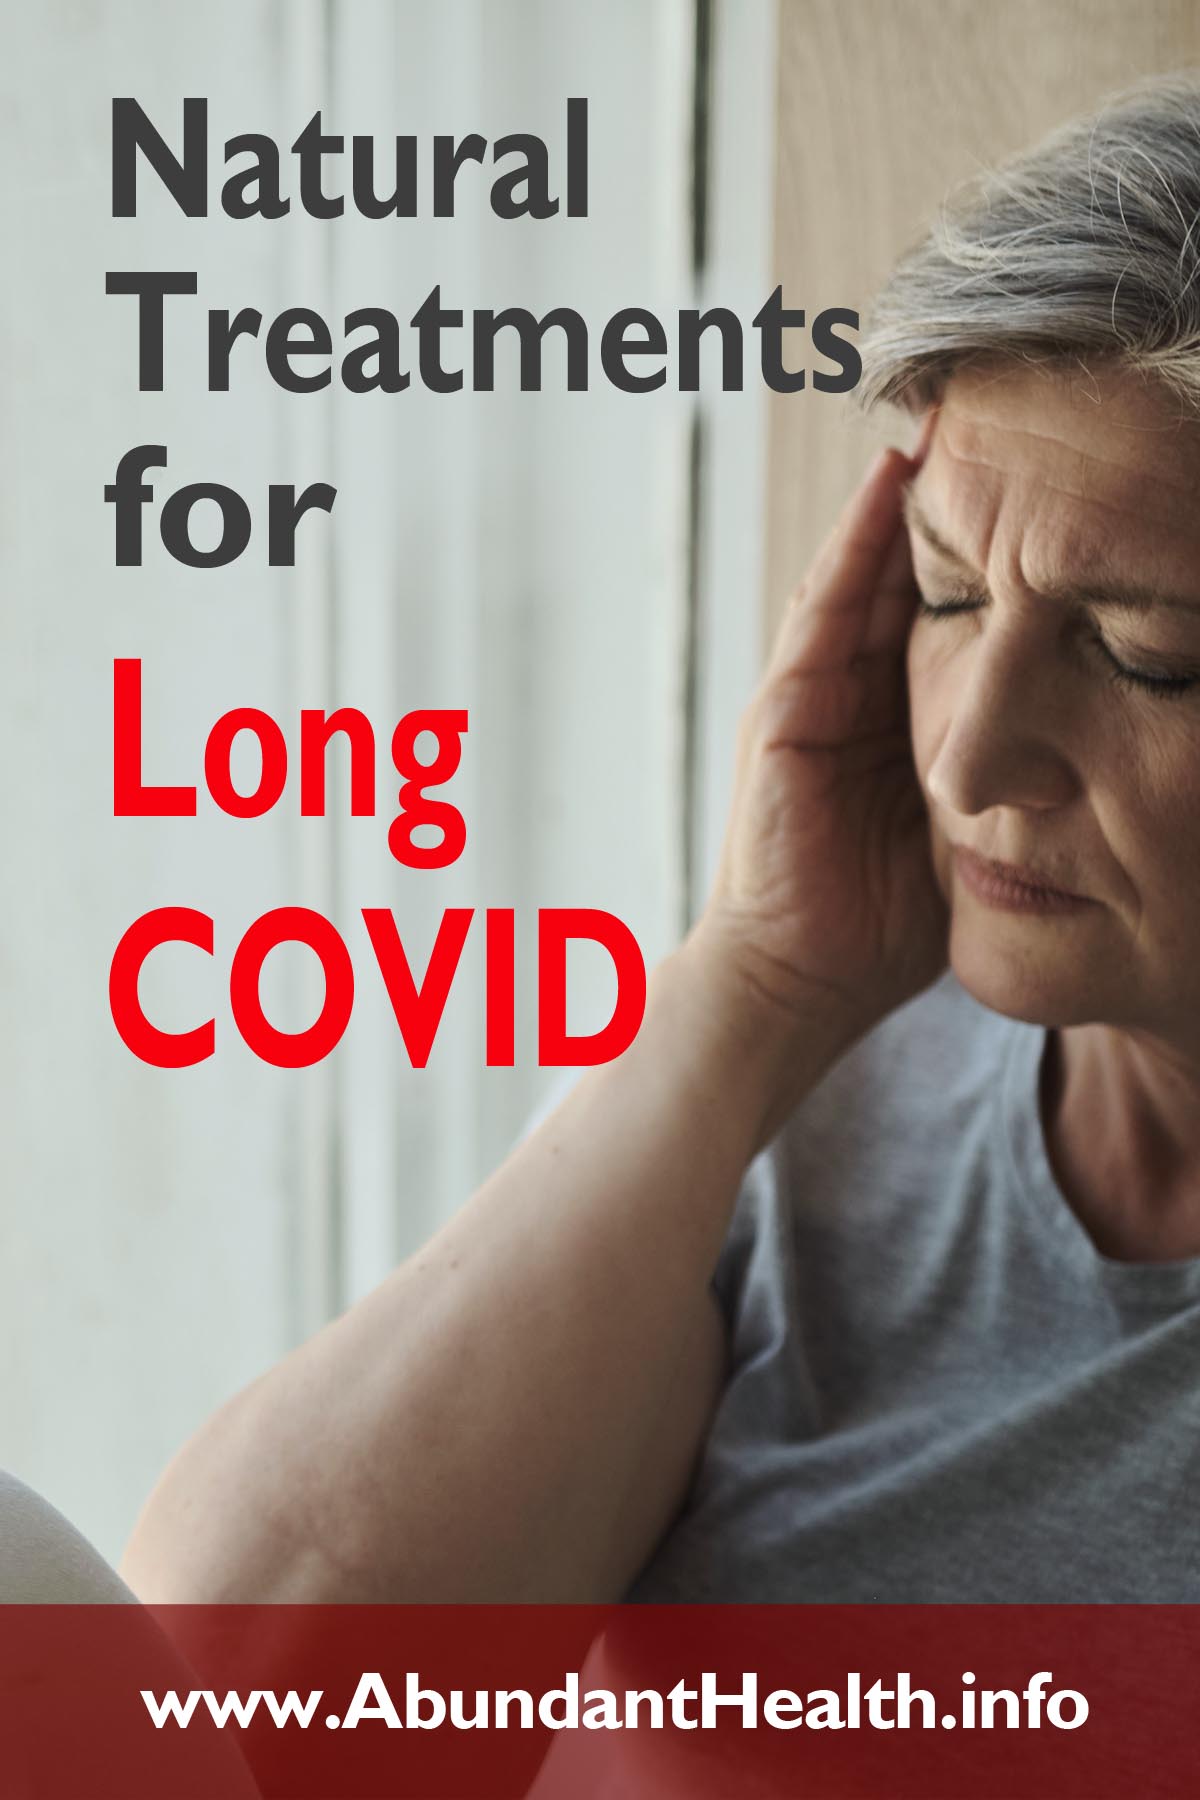 Natural Treatments for Long COVID